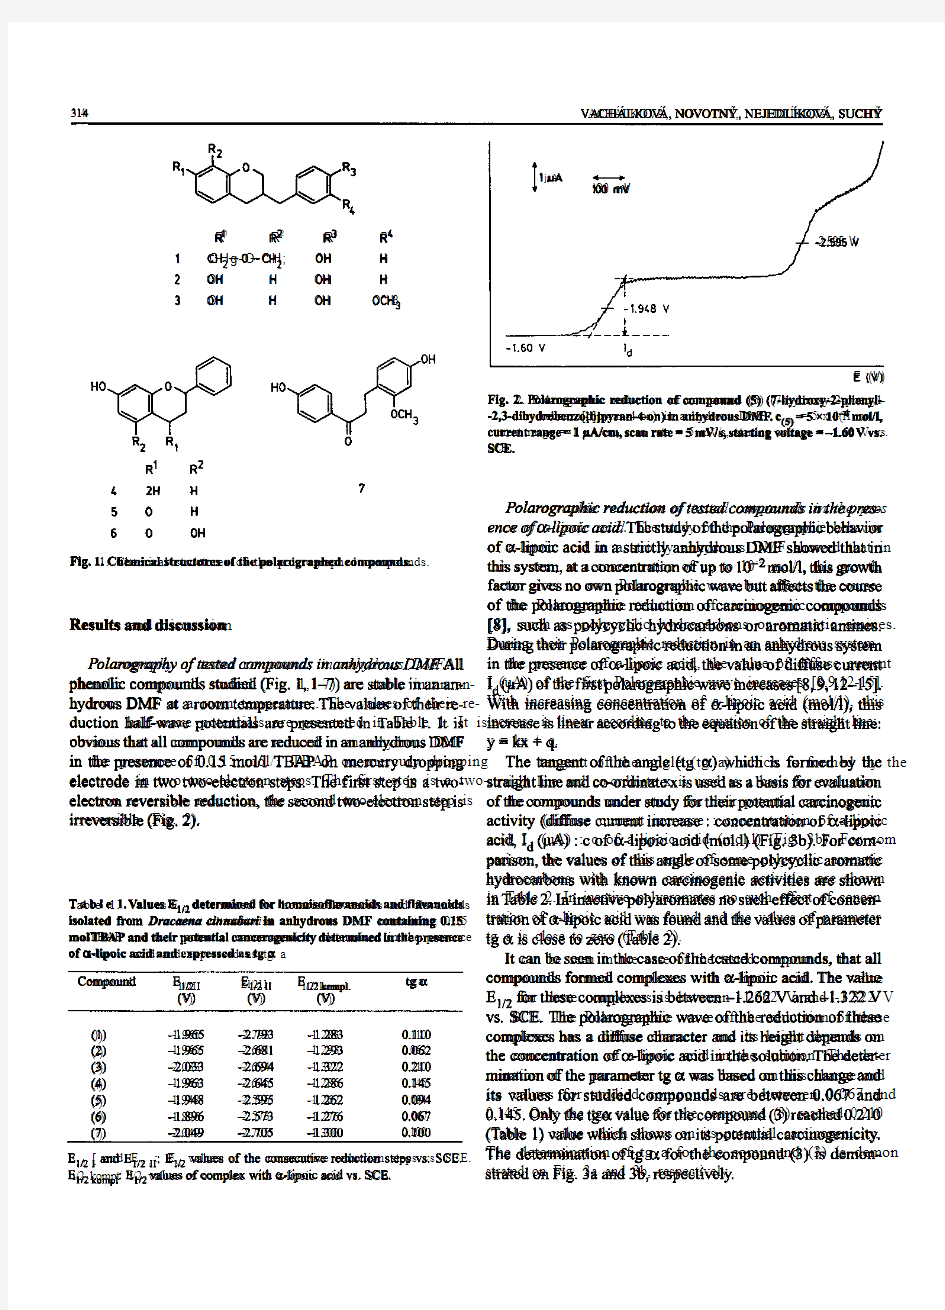 Potential carcinogenicity of homoisoflavanoids and flavonoids from Resina sanguinis draconis